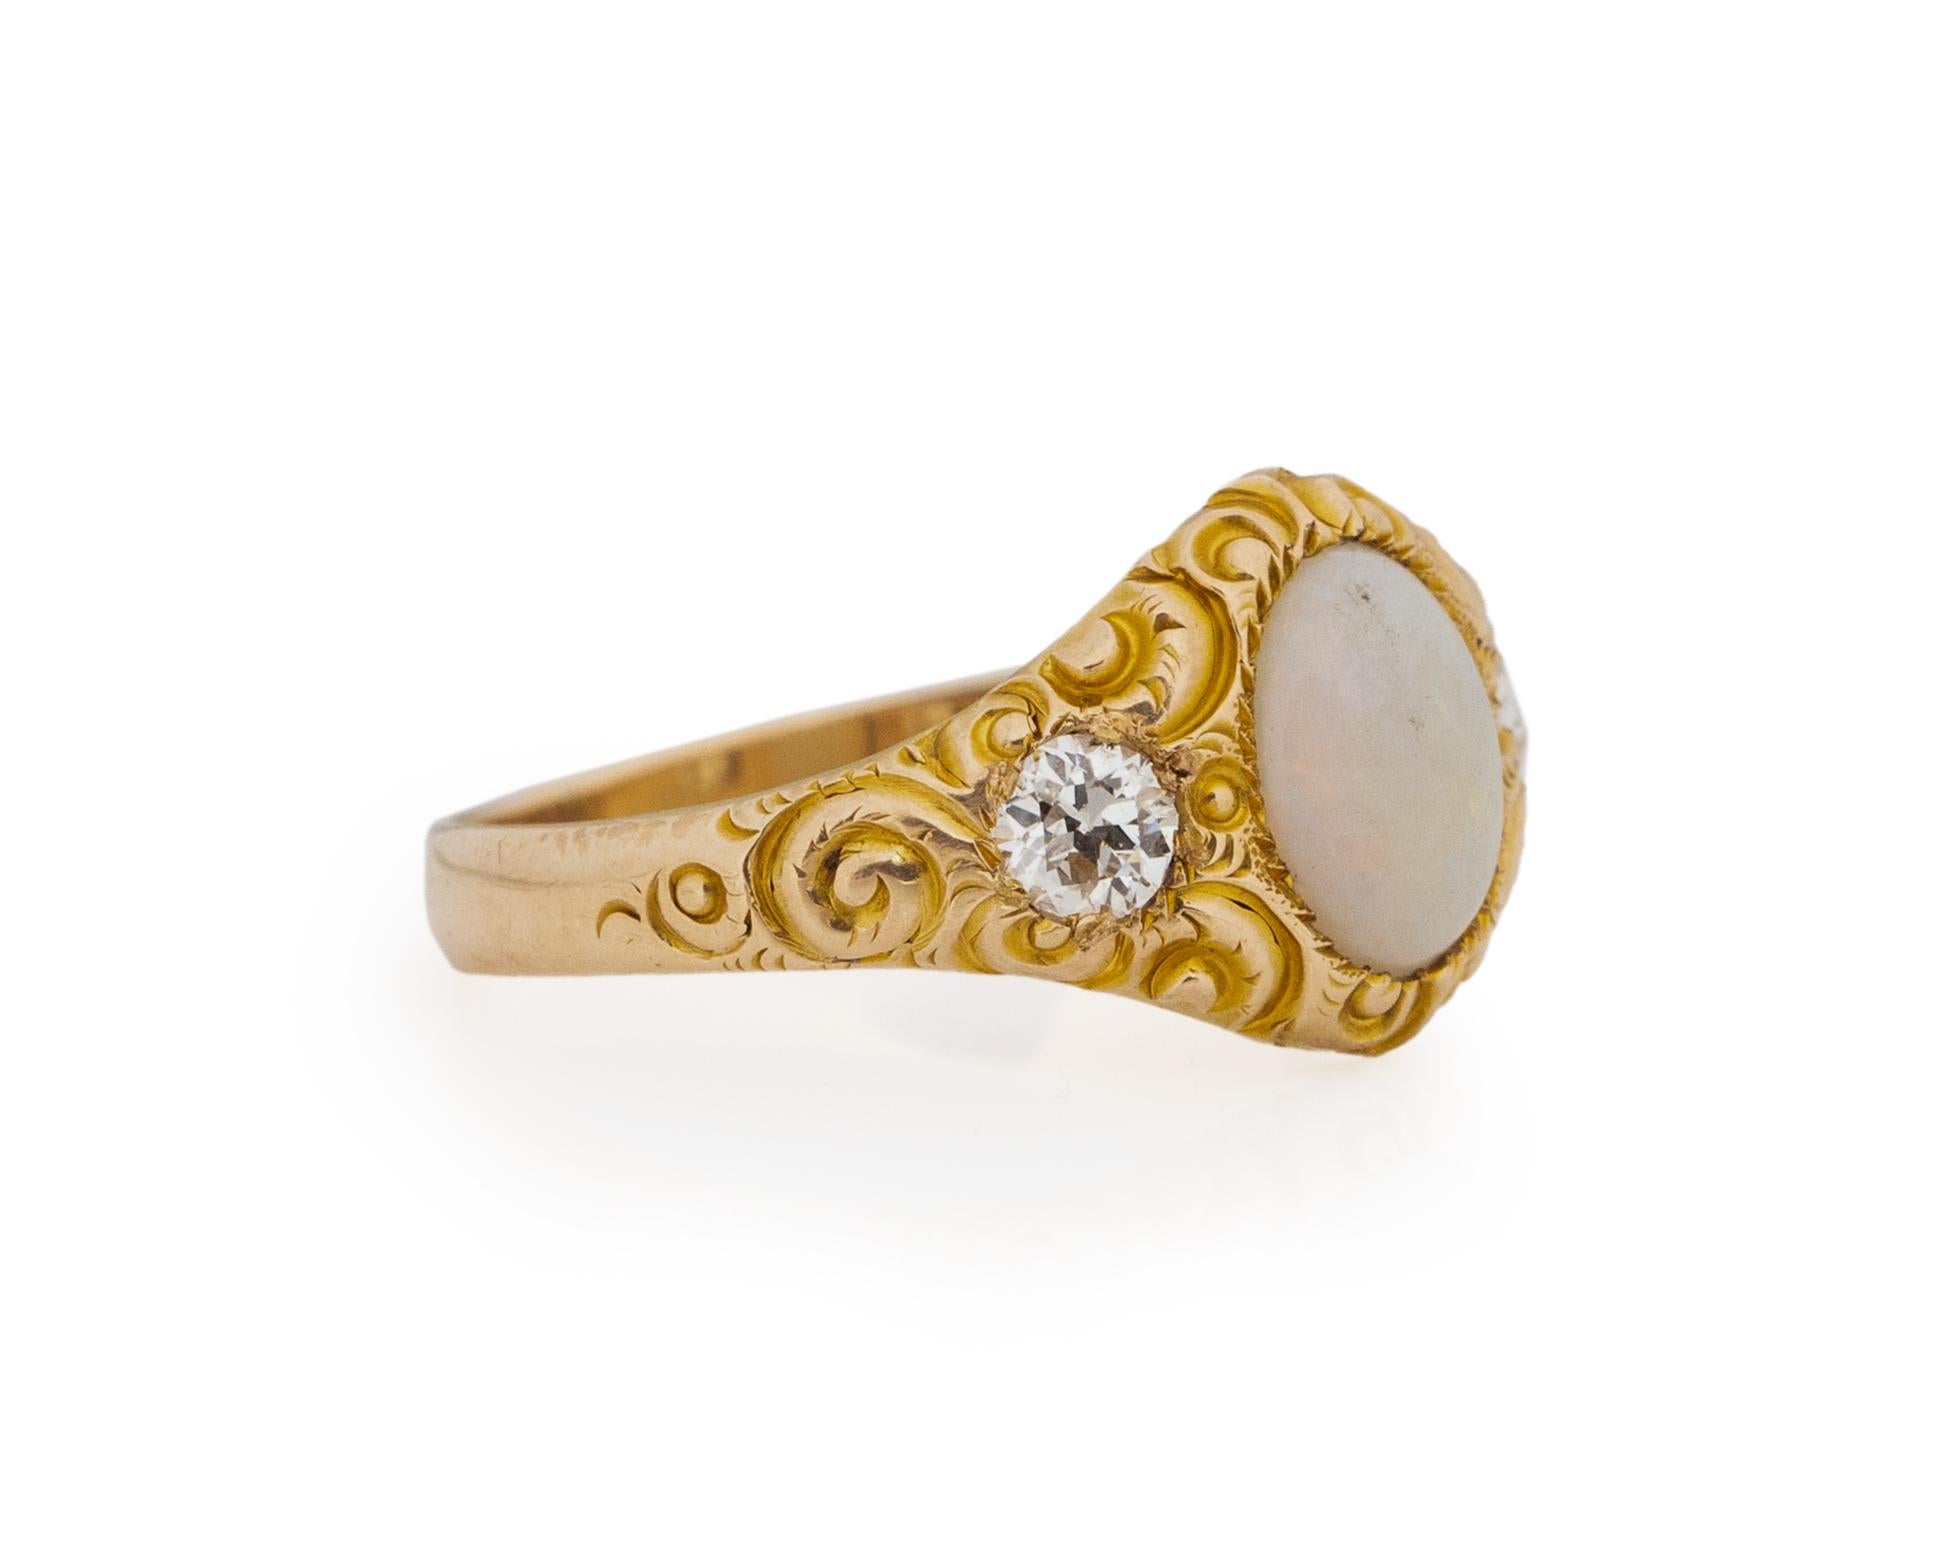 Ring Size: 7
Metal Type: 14Karat Yellow Gold [Hallmarked, and Tested]
Weight: 2.0 grams

Center Stone Details:
Weight: 1.00carat
Cut: Oval, Cabachon
Color: Mixed Colors
Type: Opal, Natural

Side Stone Details:
Weight: .30carat, total weight
Cut: